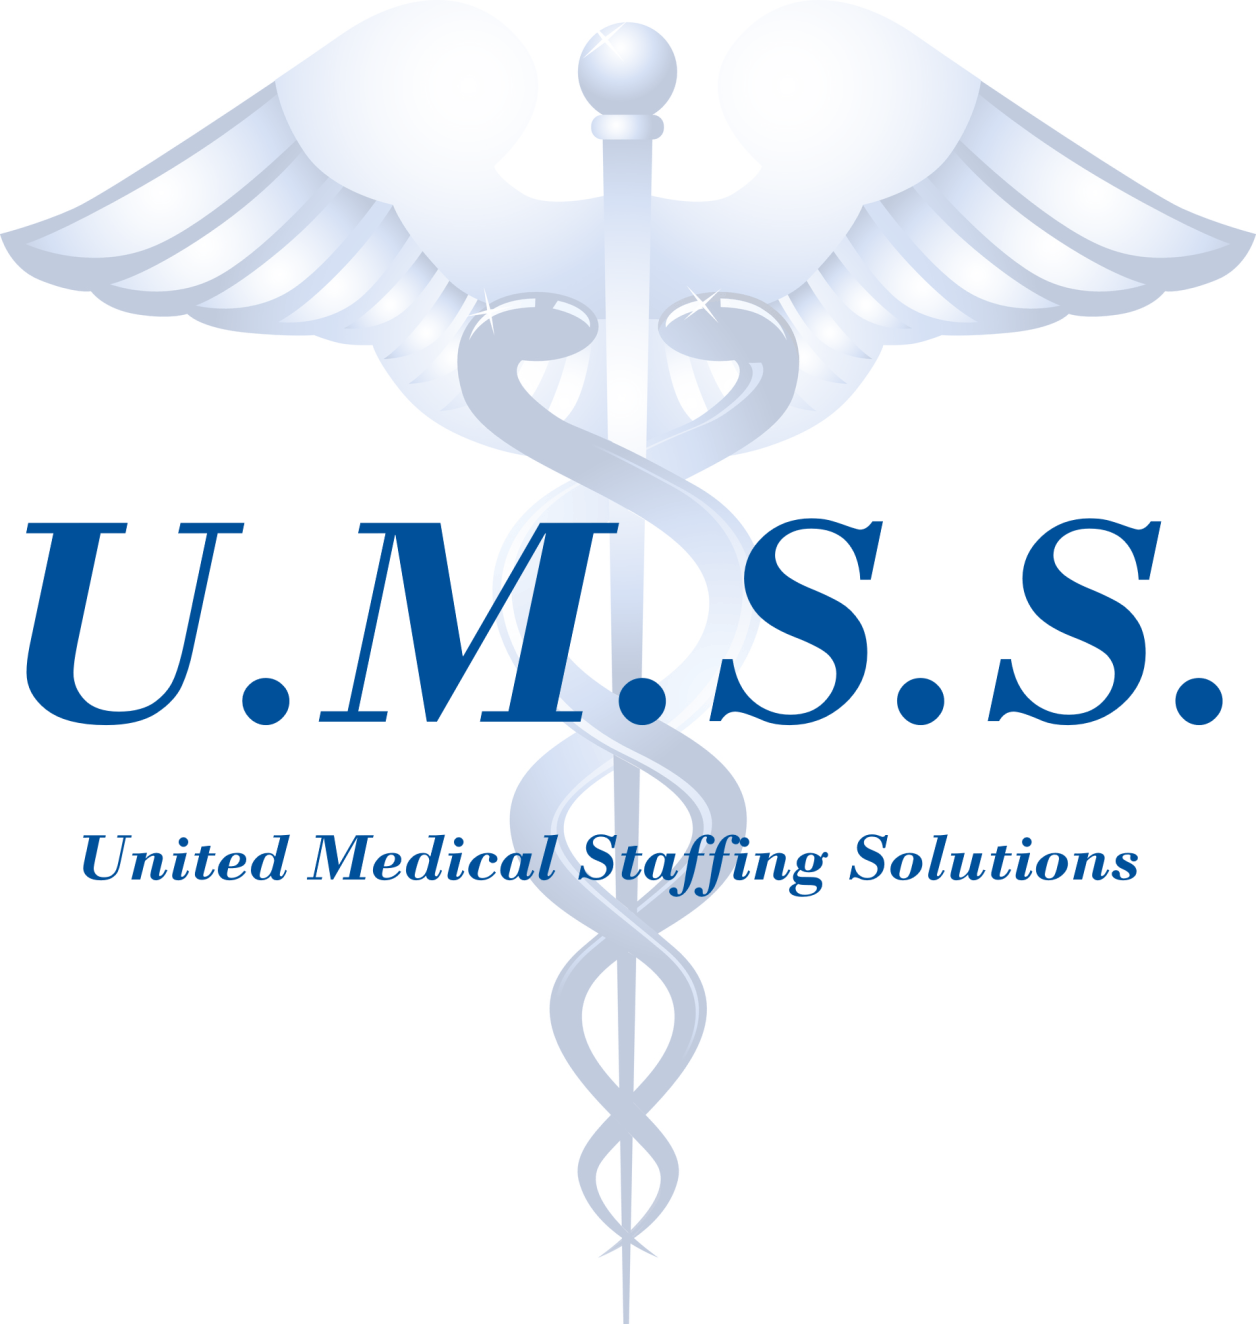 United Medical Staffing Solutions